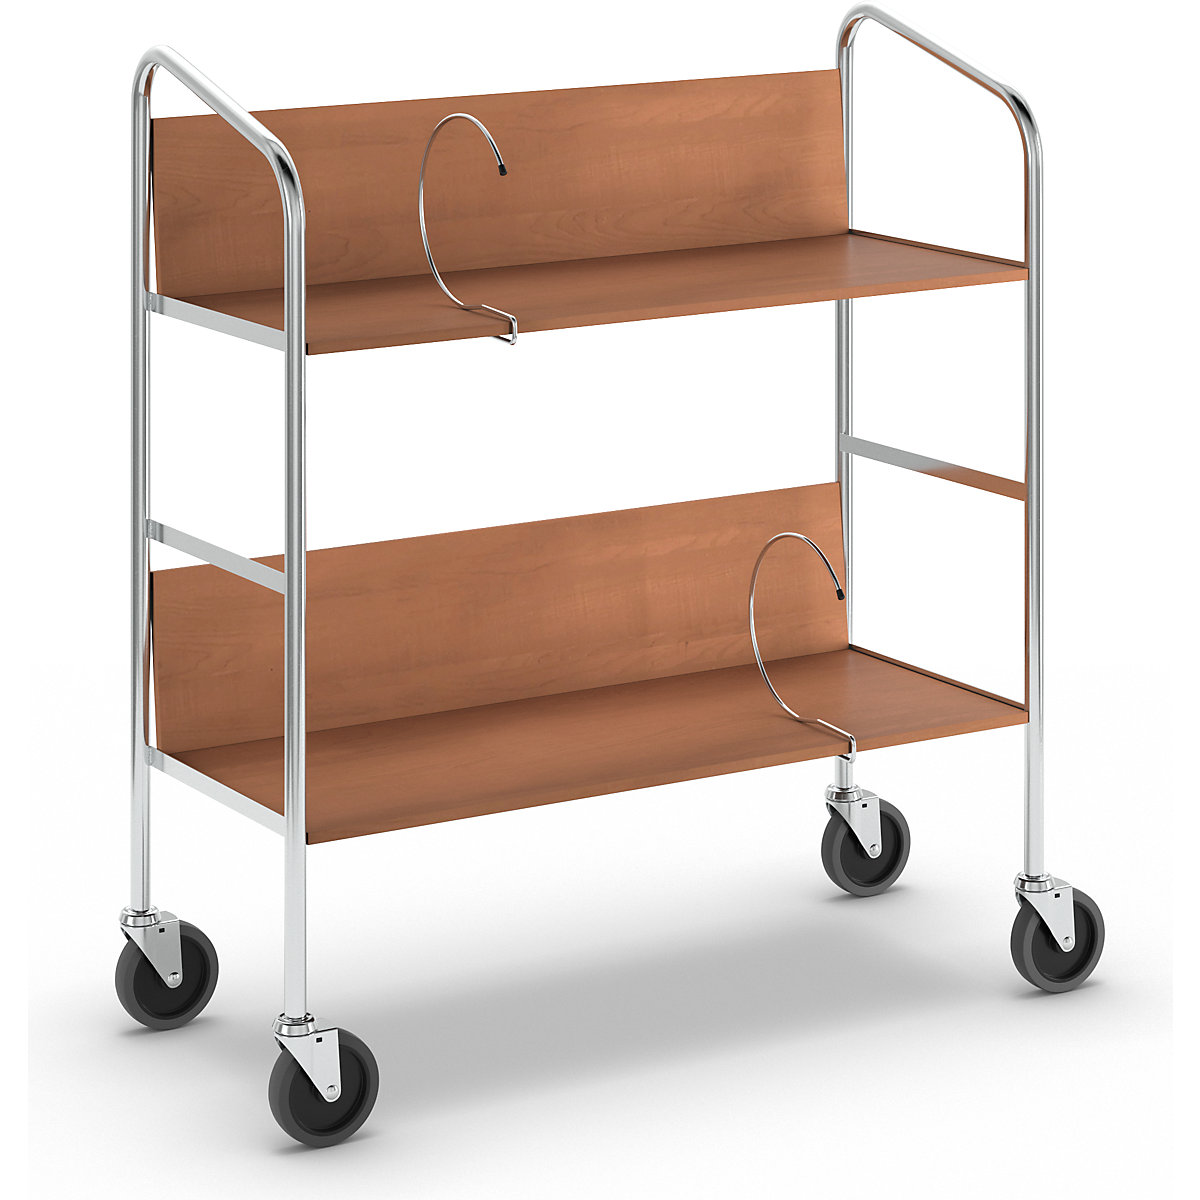 File trolley, chrome plated – HelgeNyberg, 2 shelves, LxWxH 800 x 340 x 840 mm, cherry finish-2